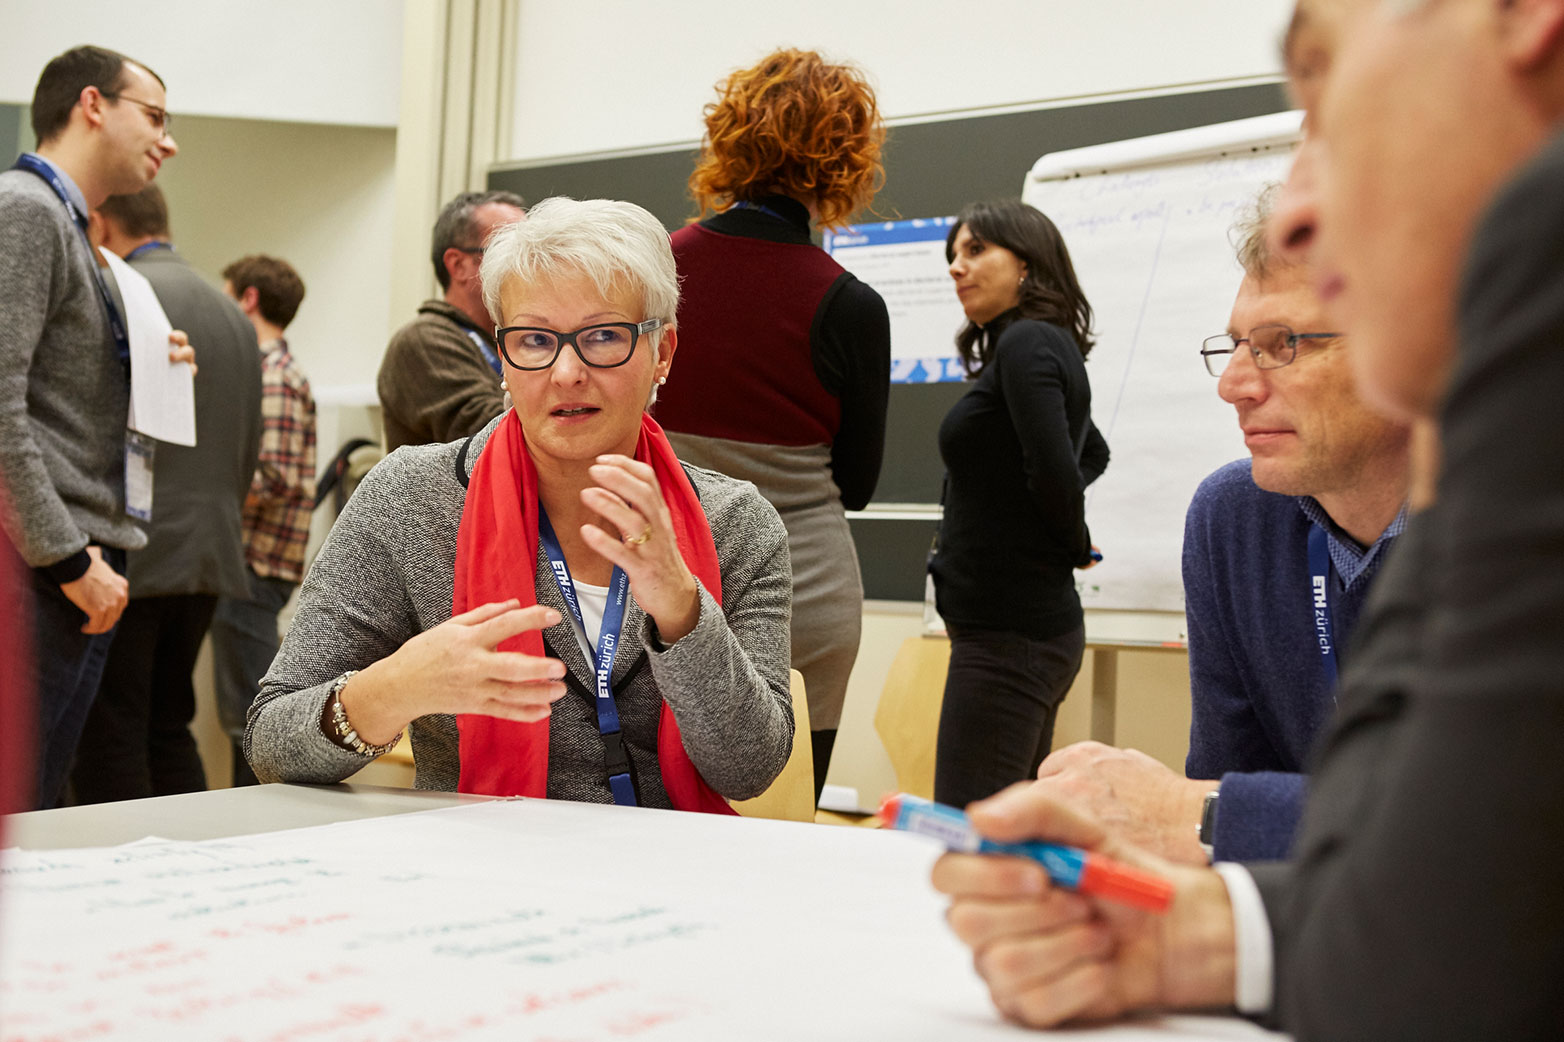 Participants of the symposium discussed different aspects of doctoral supervision in more than 40 workshops.